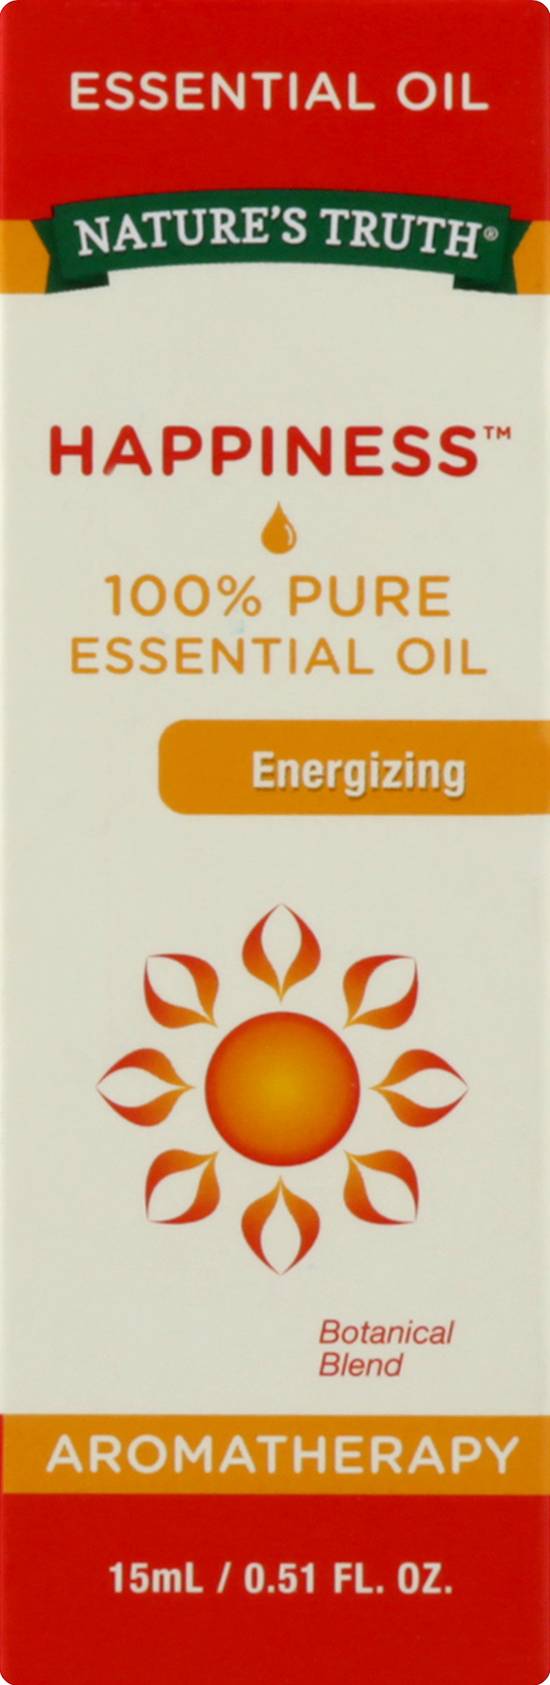 Nature's Truth Happiness 100% Pure Essential Oil Energizing (0.51 fl oz)